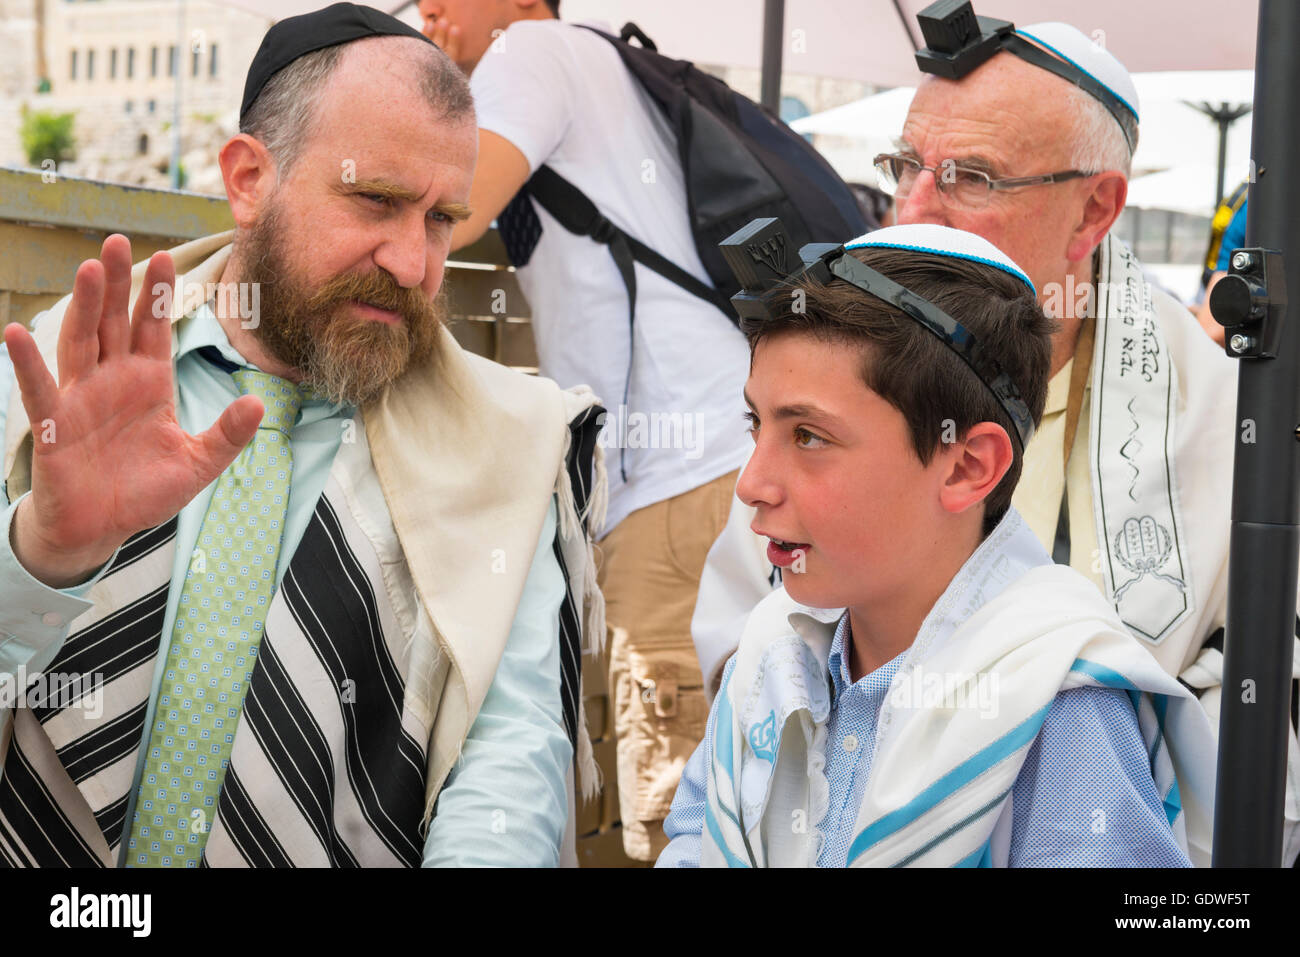 A young boy wearring his phylacteries (Tefillin), for the …